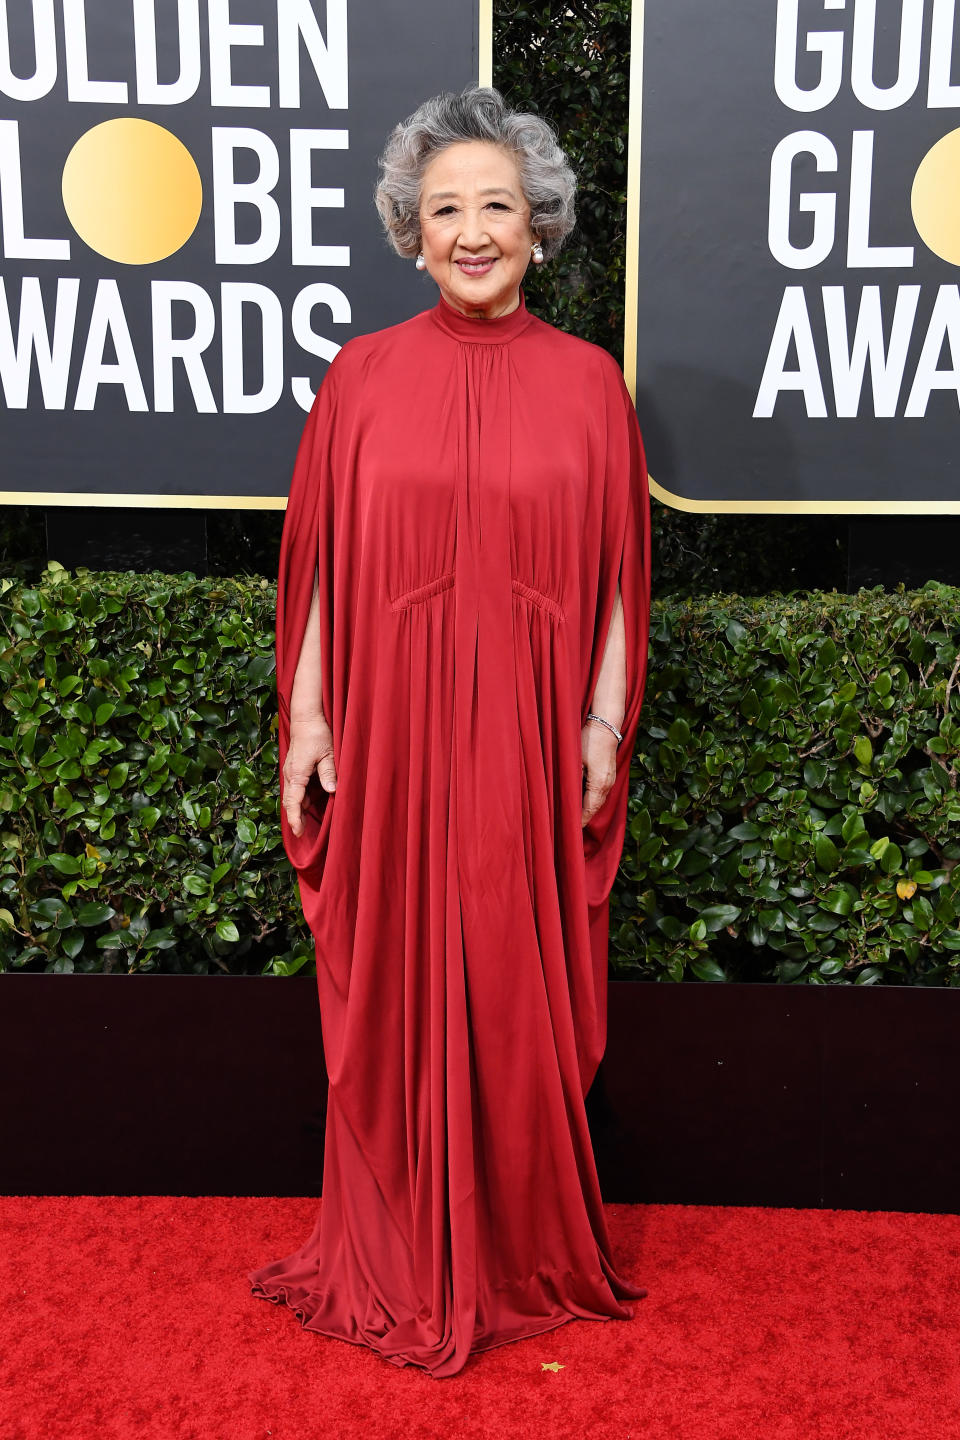 BEVERLY HILLS, CALIFORNIA - JANUARY 05: Zhao Shuzhen attends the 77th Annual Golden Globe Awards at The Beverly Hilton Hotel on January 05, 2020 in Beverly Hills, California. (Photo by Steve Granitz/WireImage)